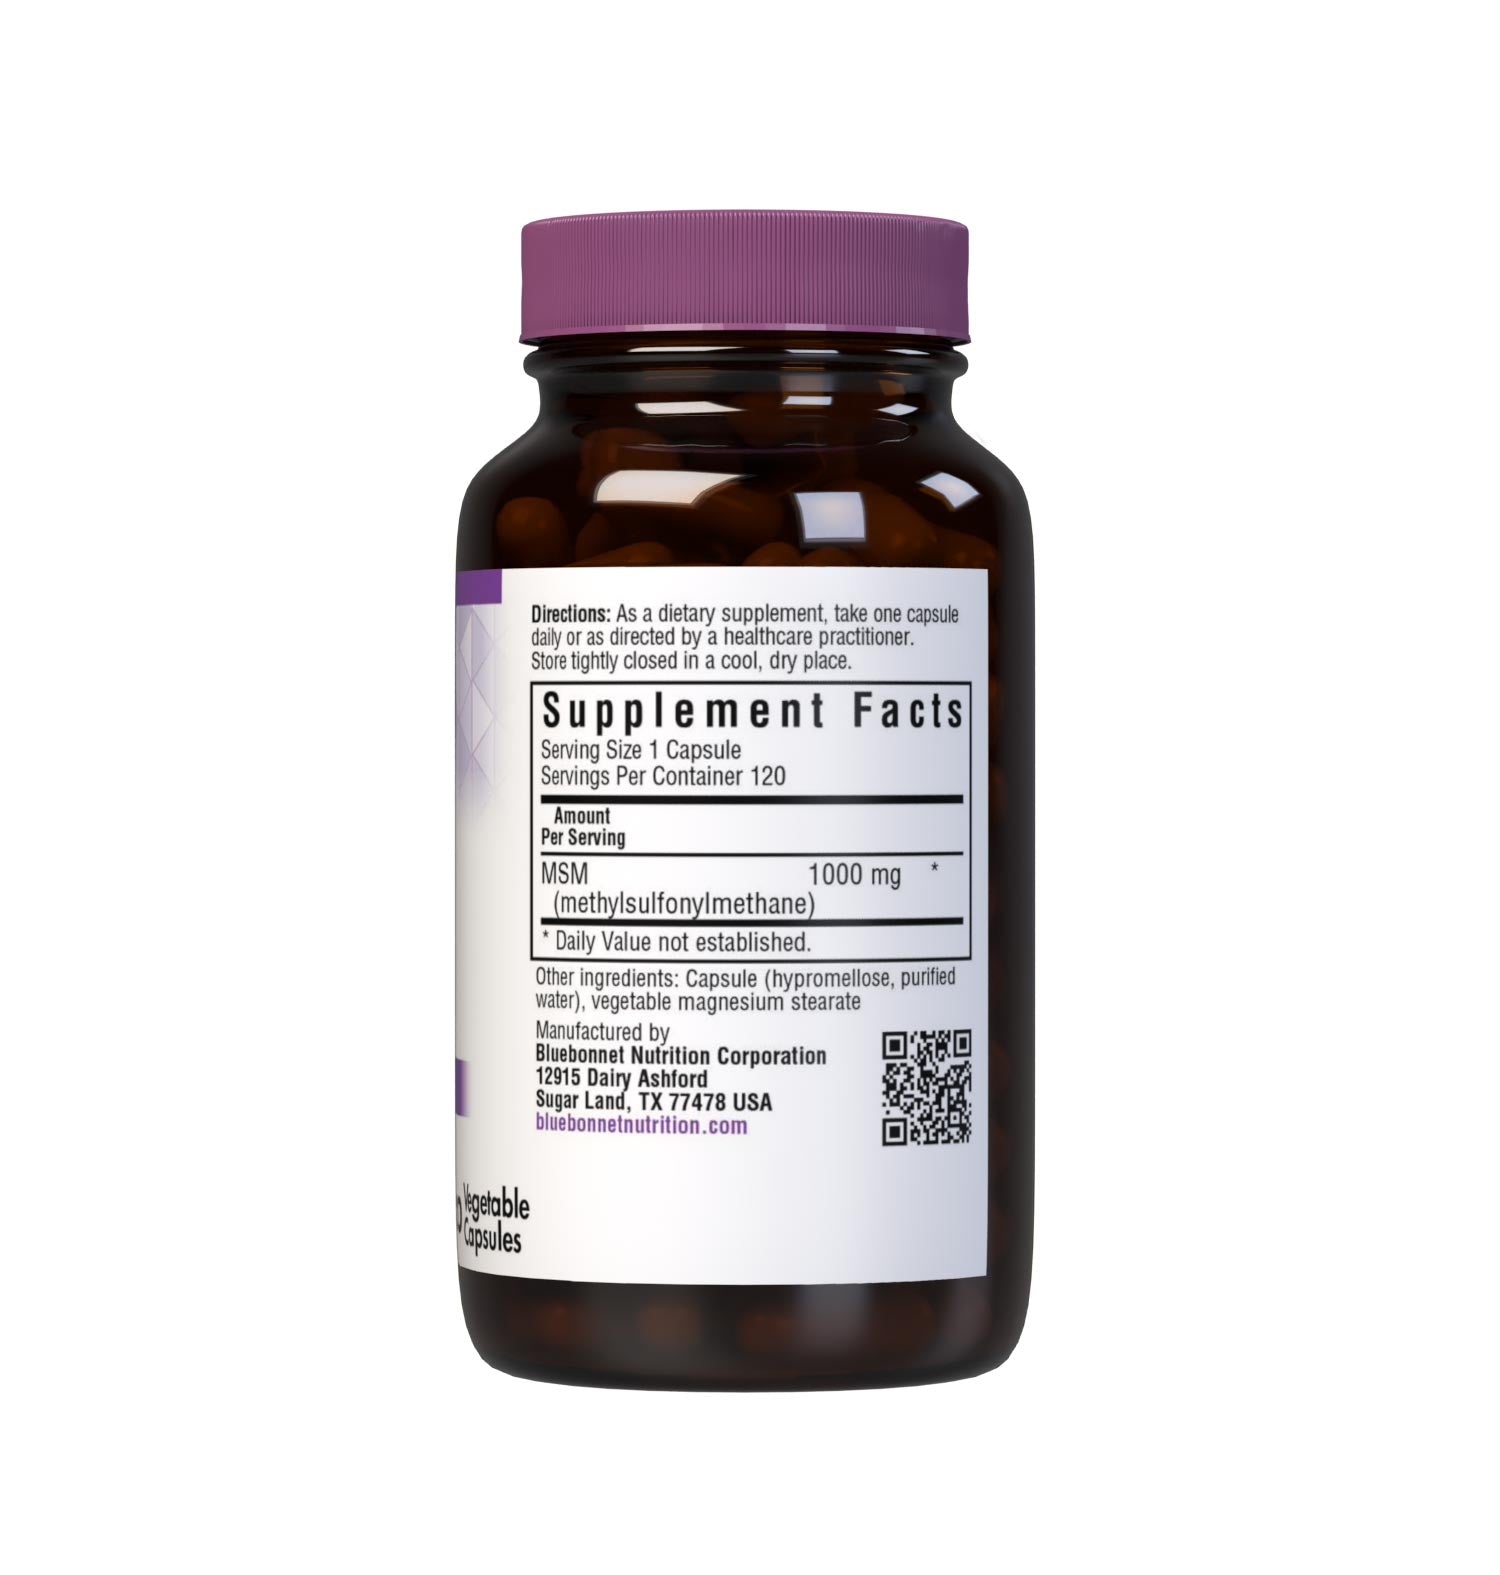 Bluebonnet’s MSM 1000 mg 120 Vegetable Capsules are formulated with patented OptiMSM methylsulfonylmethane, a non-toxic form of active sulfur that is tested in our own state-of-the-art laboratory for purity and potency. MSM helps support healthy joint cartilage and connective tissue. Supplement facts panel. #size_120 count